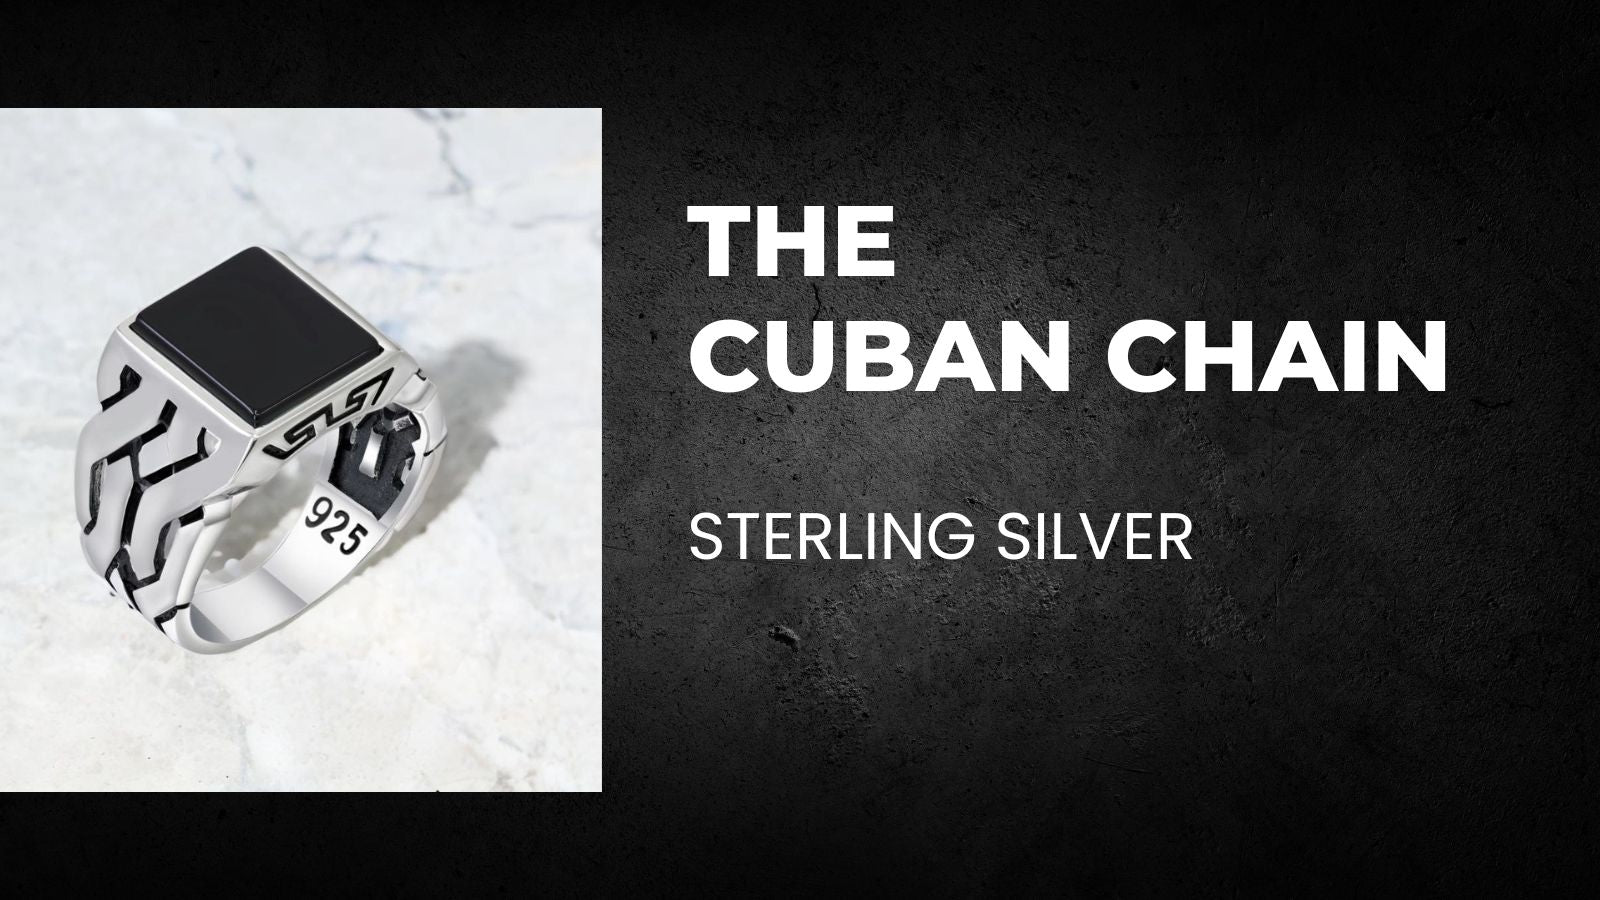 Load video: Video of Sterling Silver Ring for Men with Onyx Stone, Cuban Chain Motif